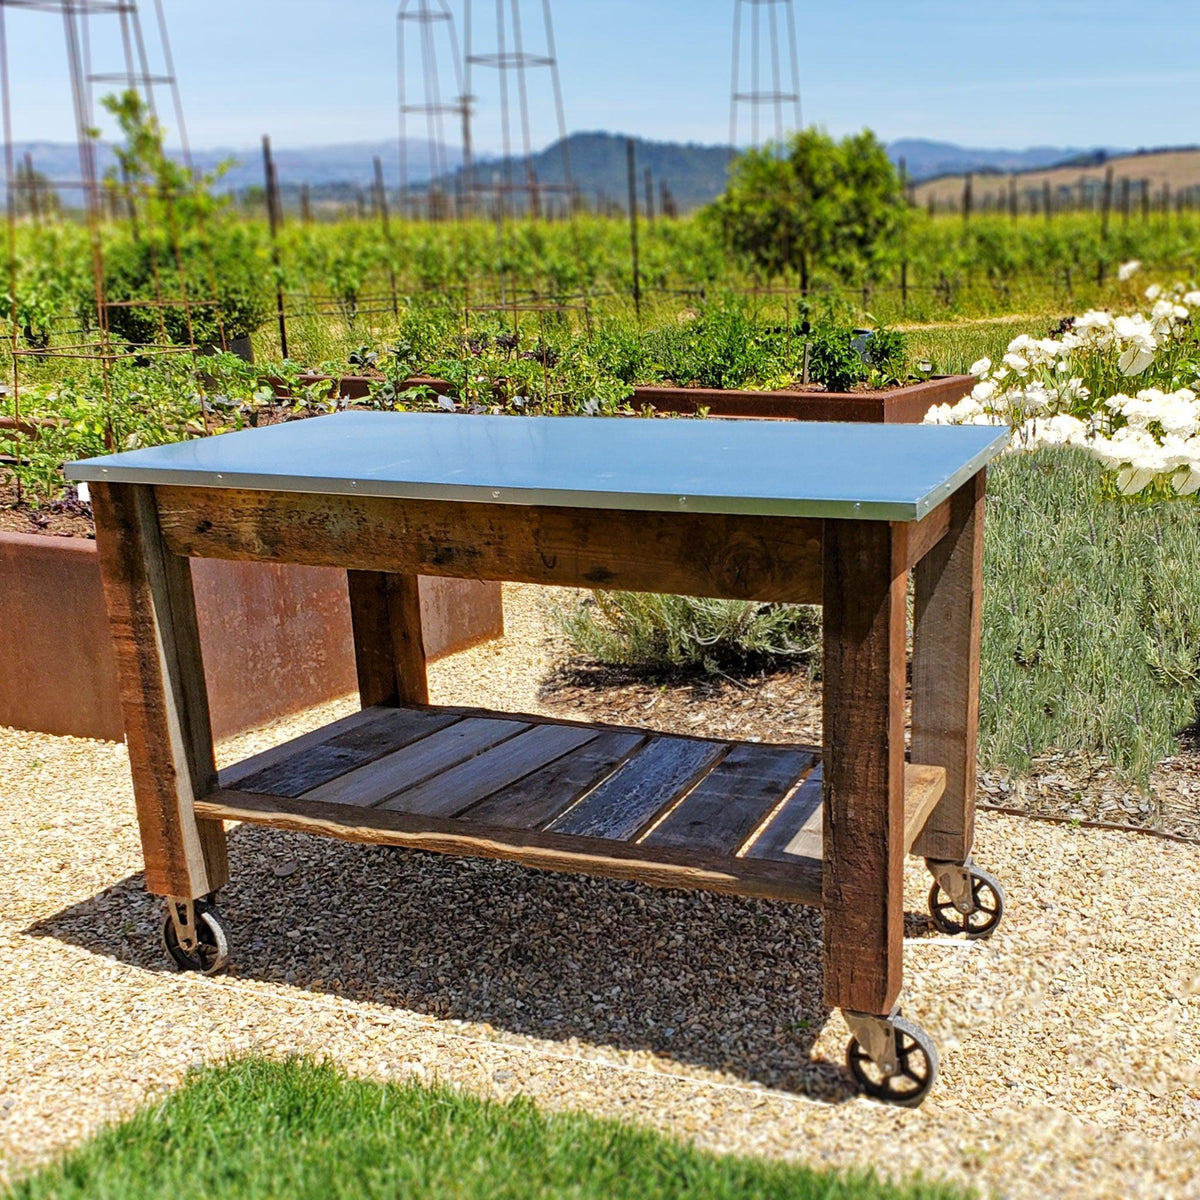 Lee Display's gorgeous Potting Table and Rolling Workbench is photographed in a garden in Napa California